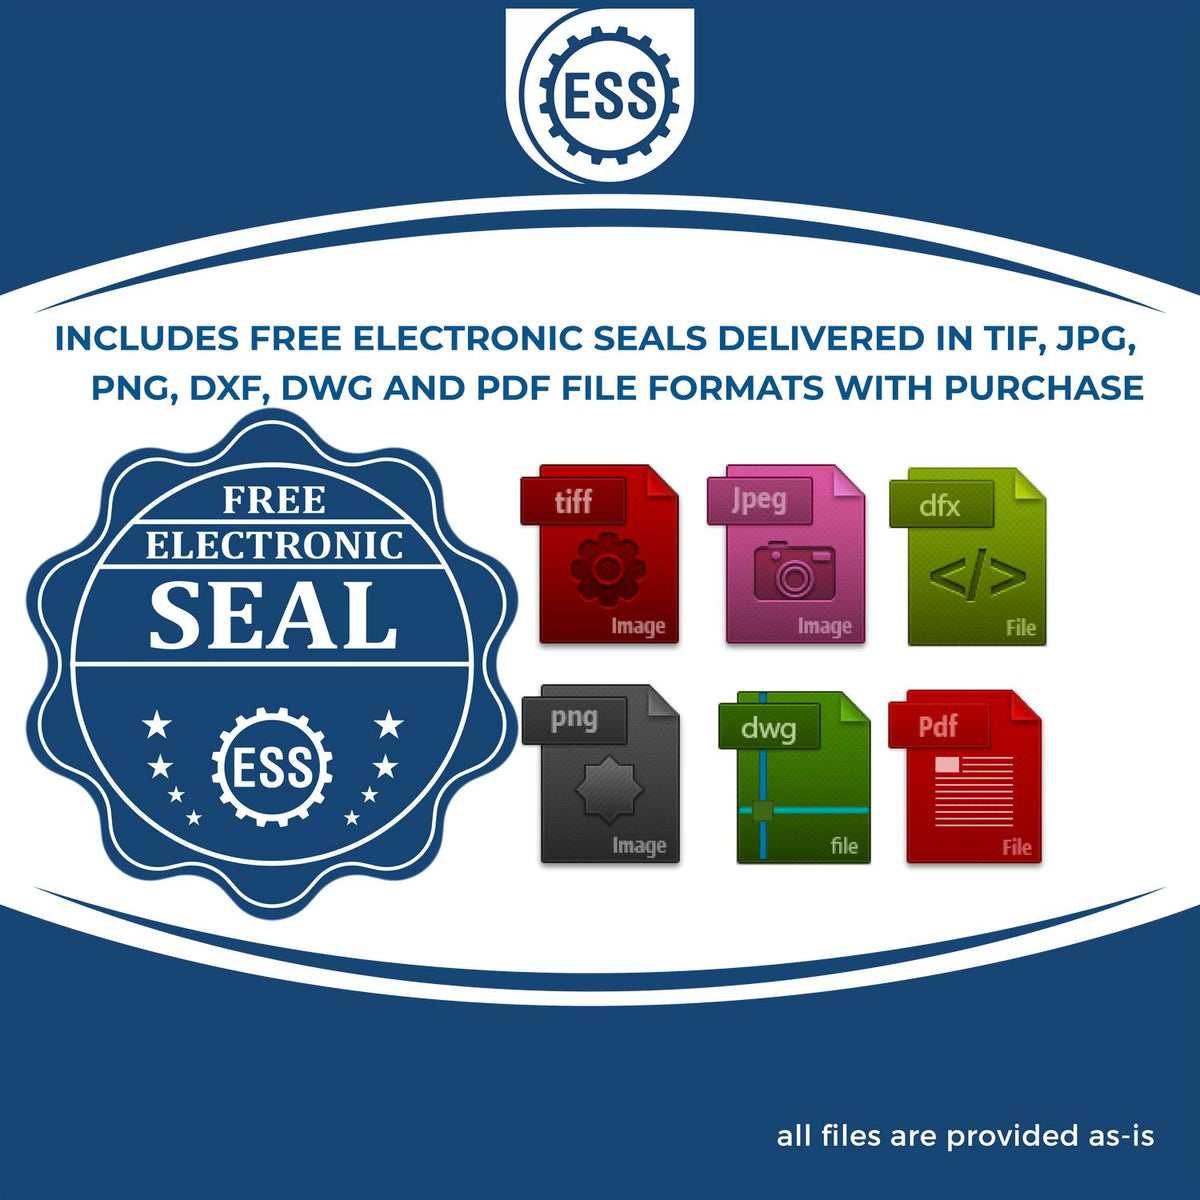 An infographic for the free electronic seal for the Heavy-Duty Iowa Rectangular Notary Stamp illustrating the different file type icons such as DXF, DWG, TIF, JPG and PNG.